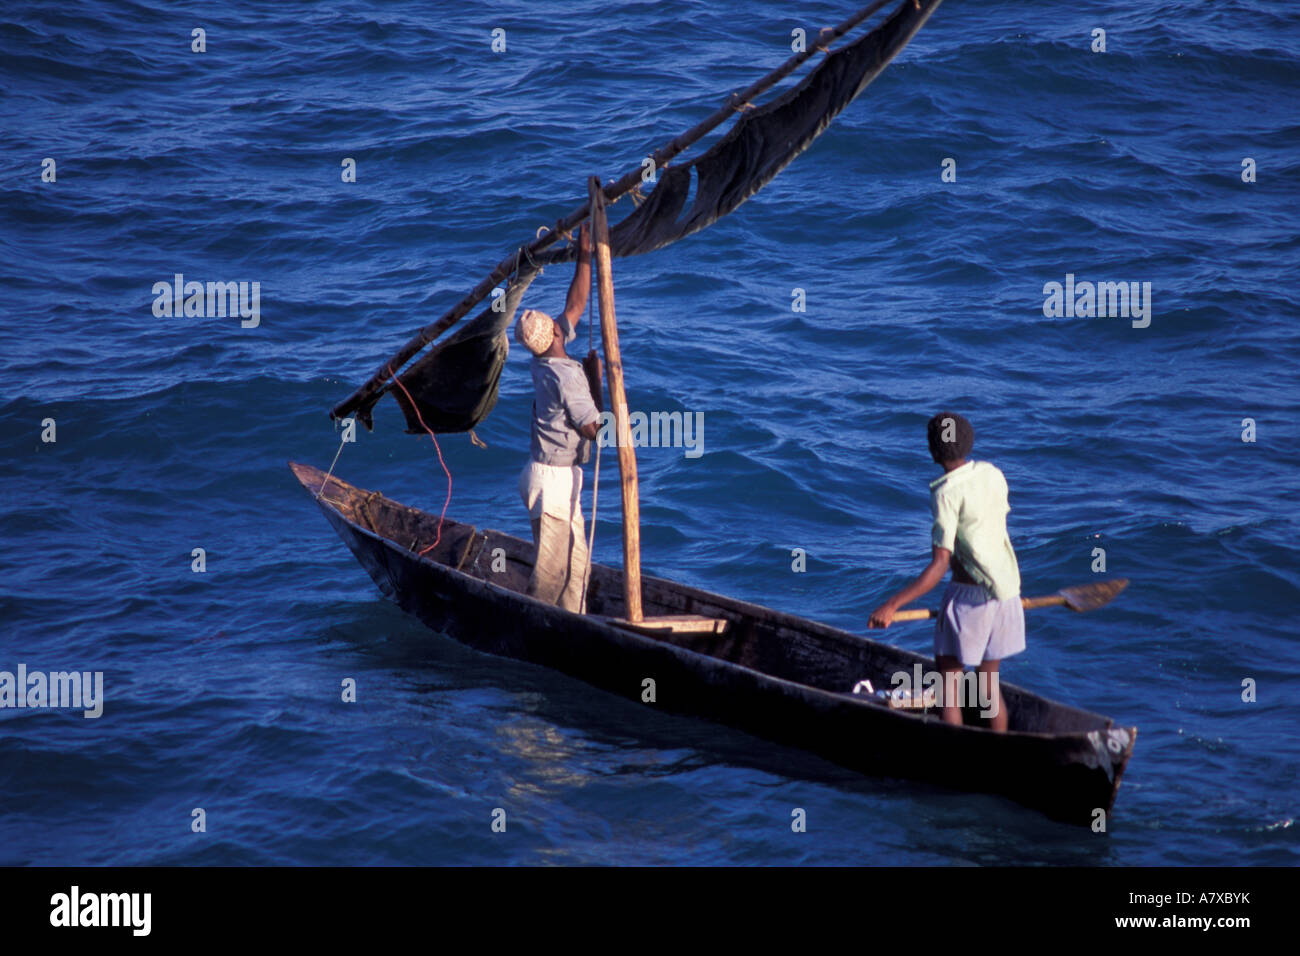 Woman fishing with a traditional woven basket, wooden fishing